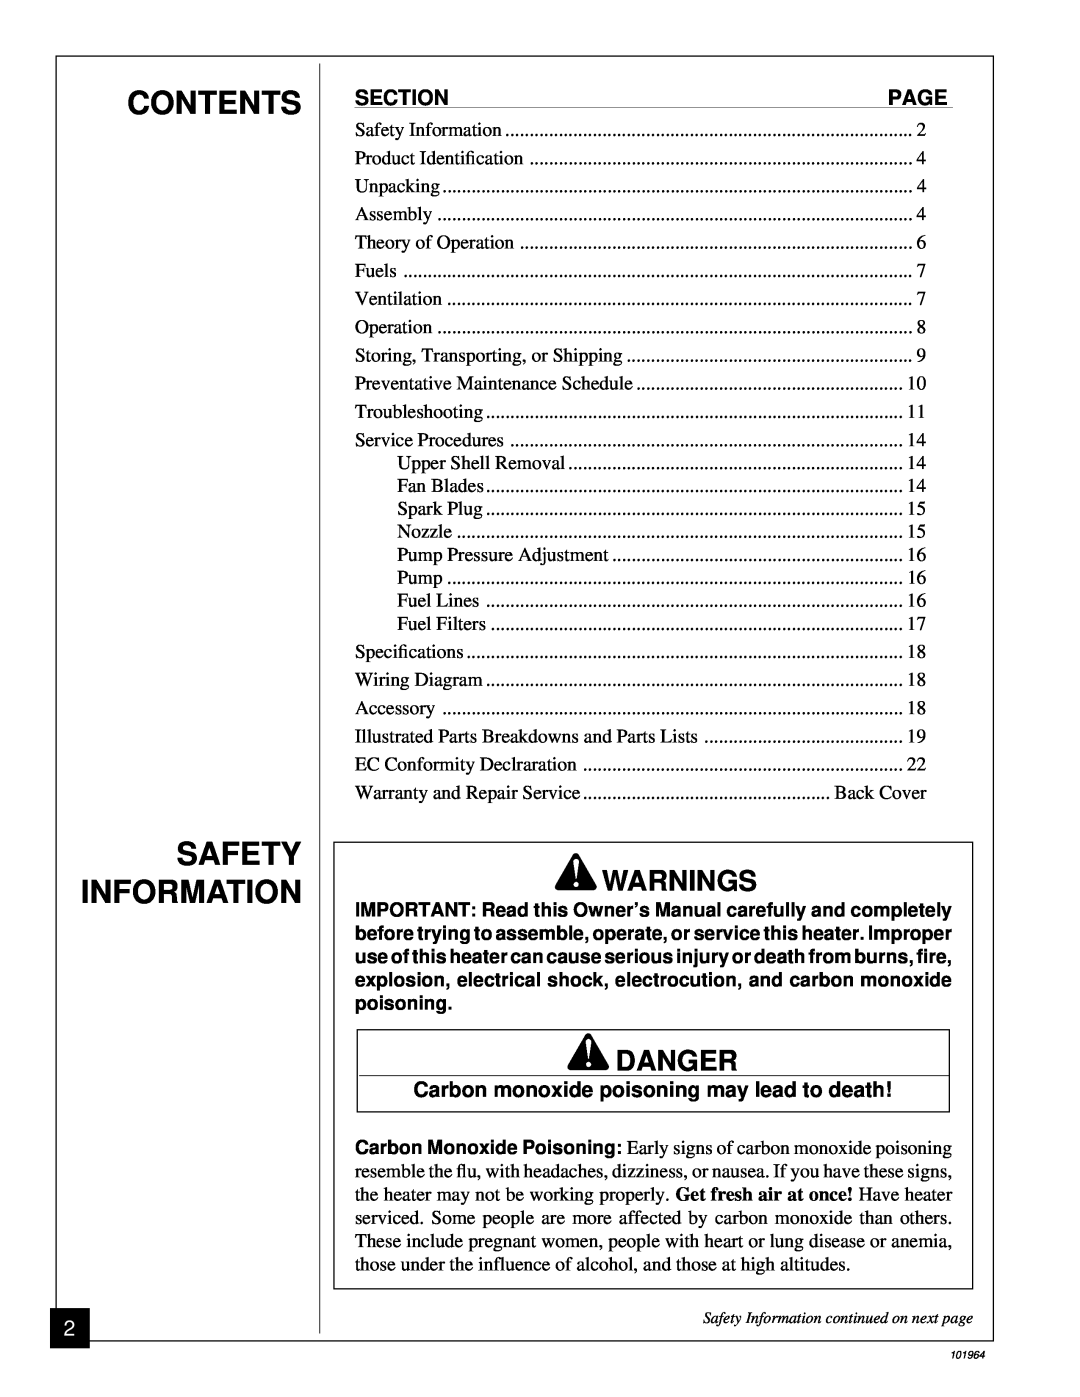 Desa B350CE Contents Safety Information, Warnings, Danger, Section, Page, Carbon monoxide poisoning may lead to death 